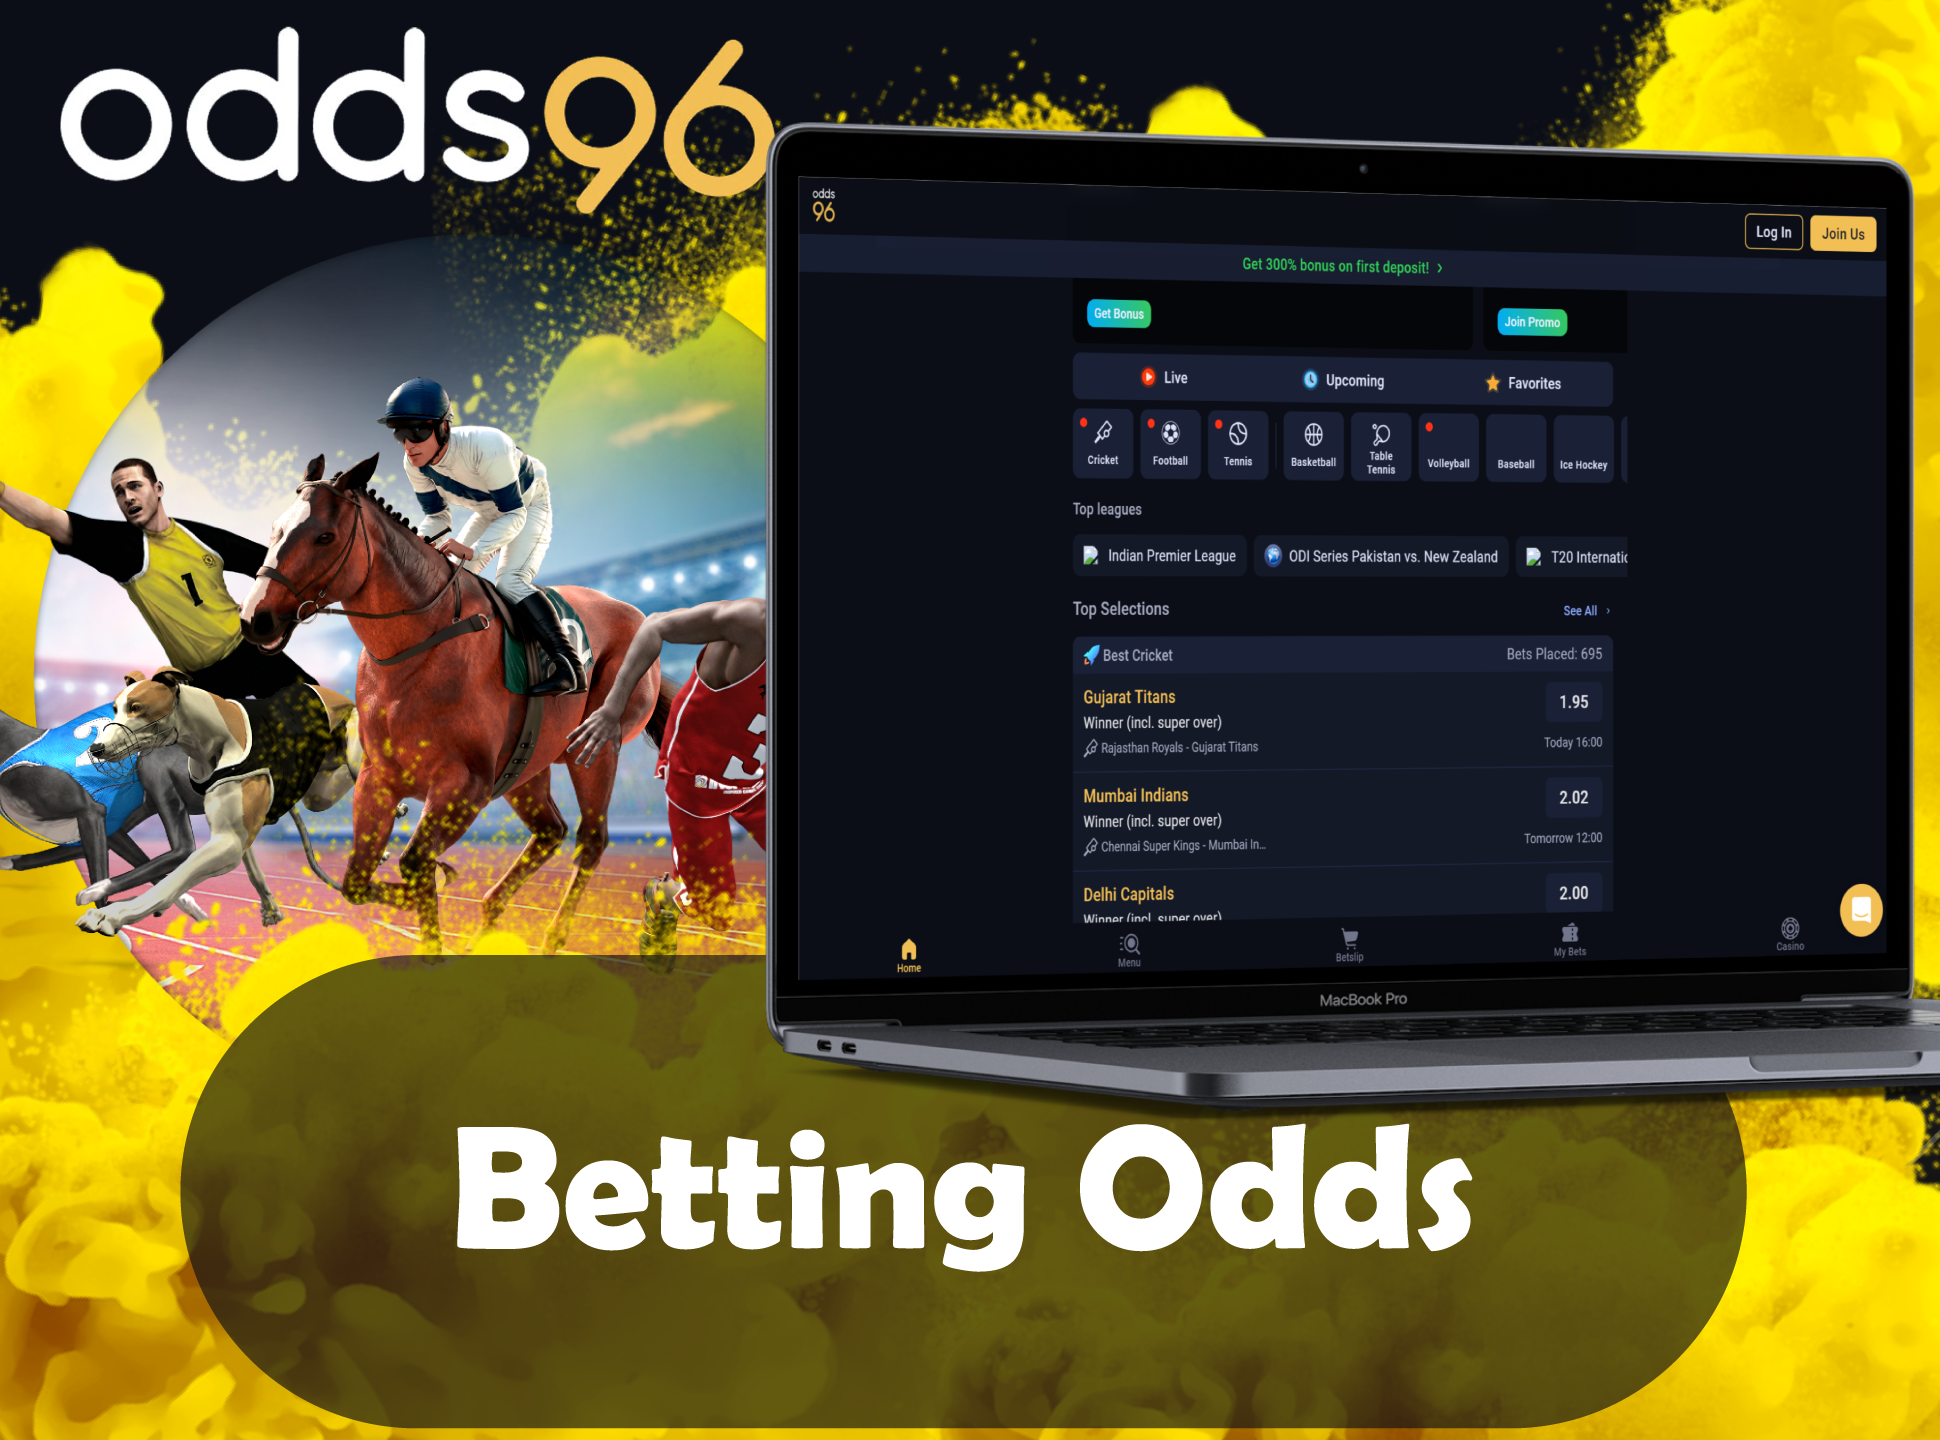 Calculate odds for next bet at Odds96 on special page.